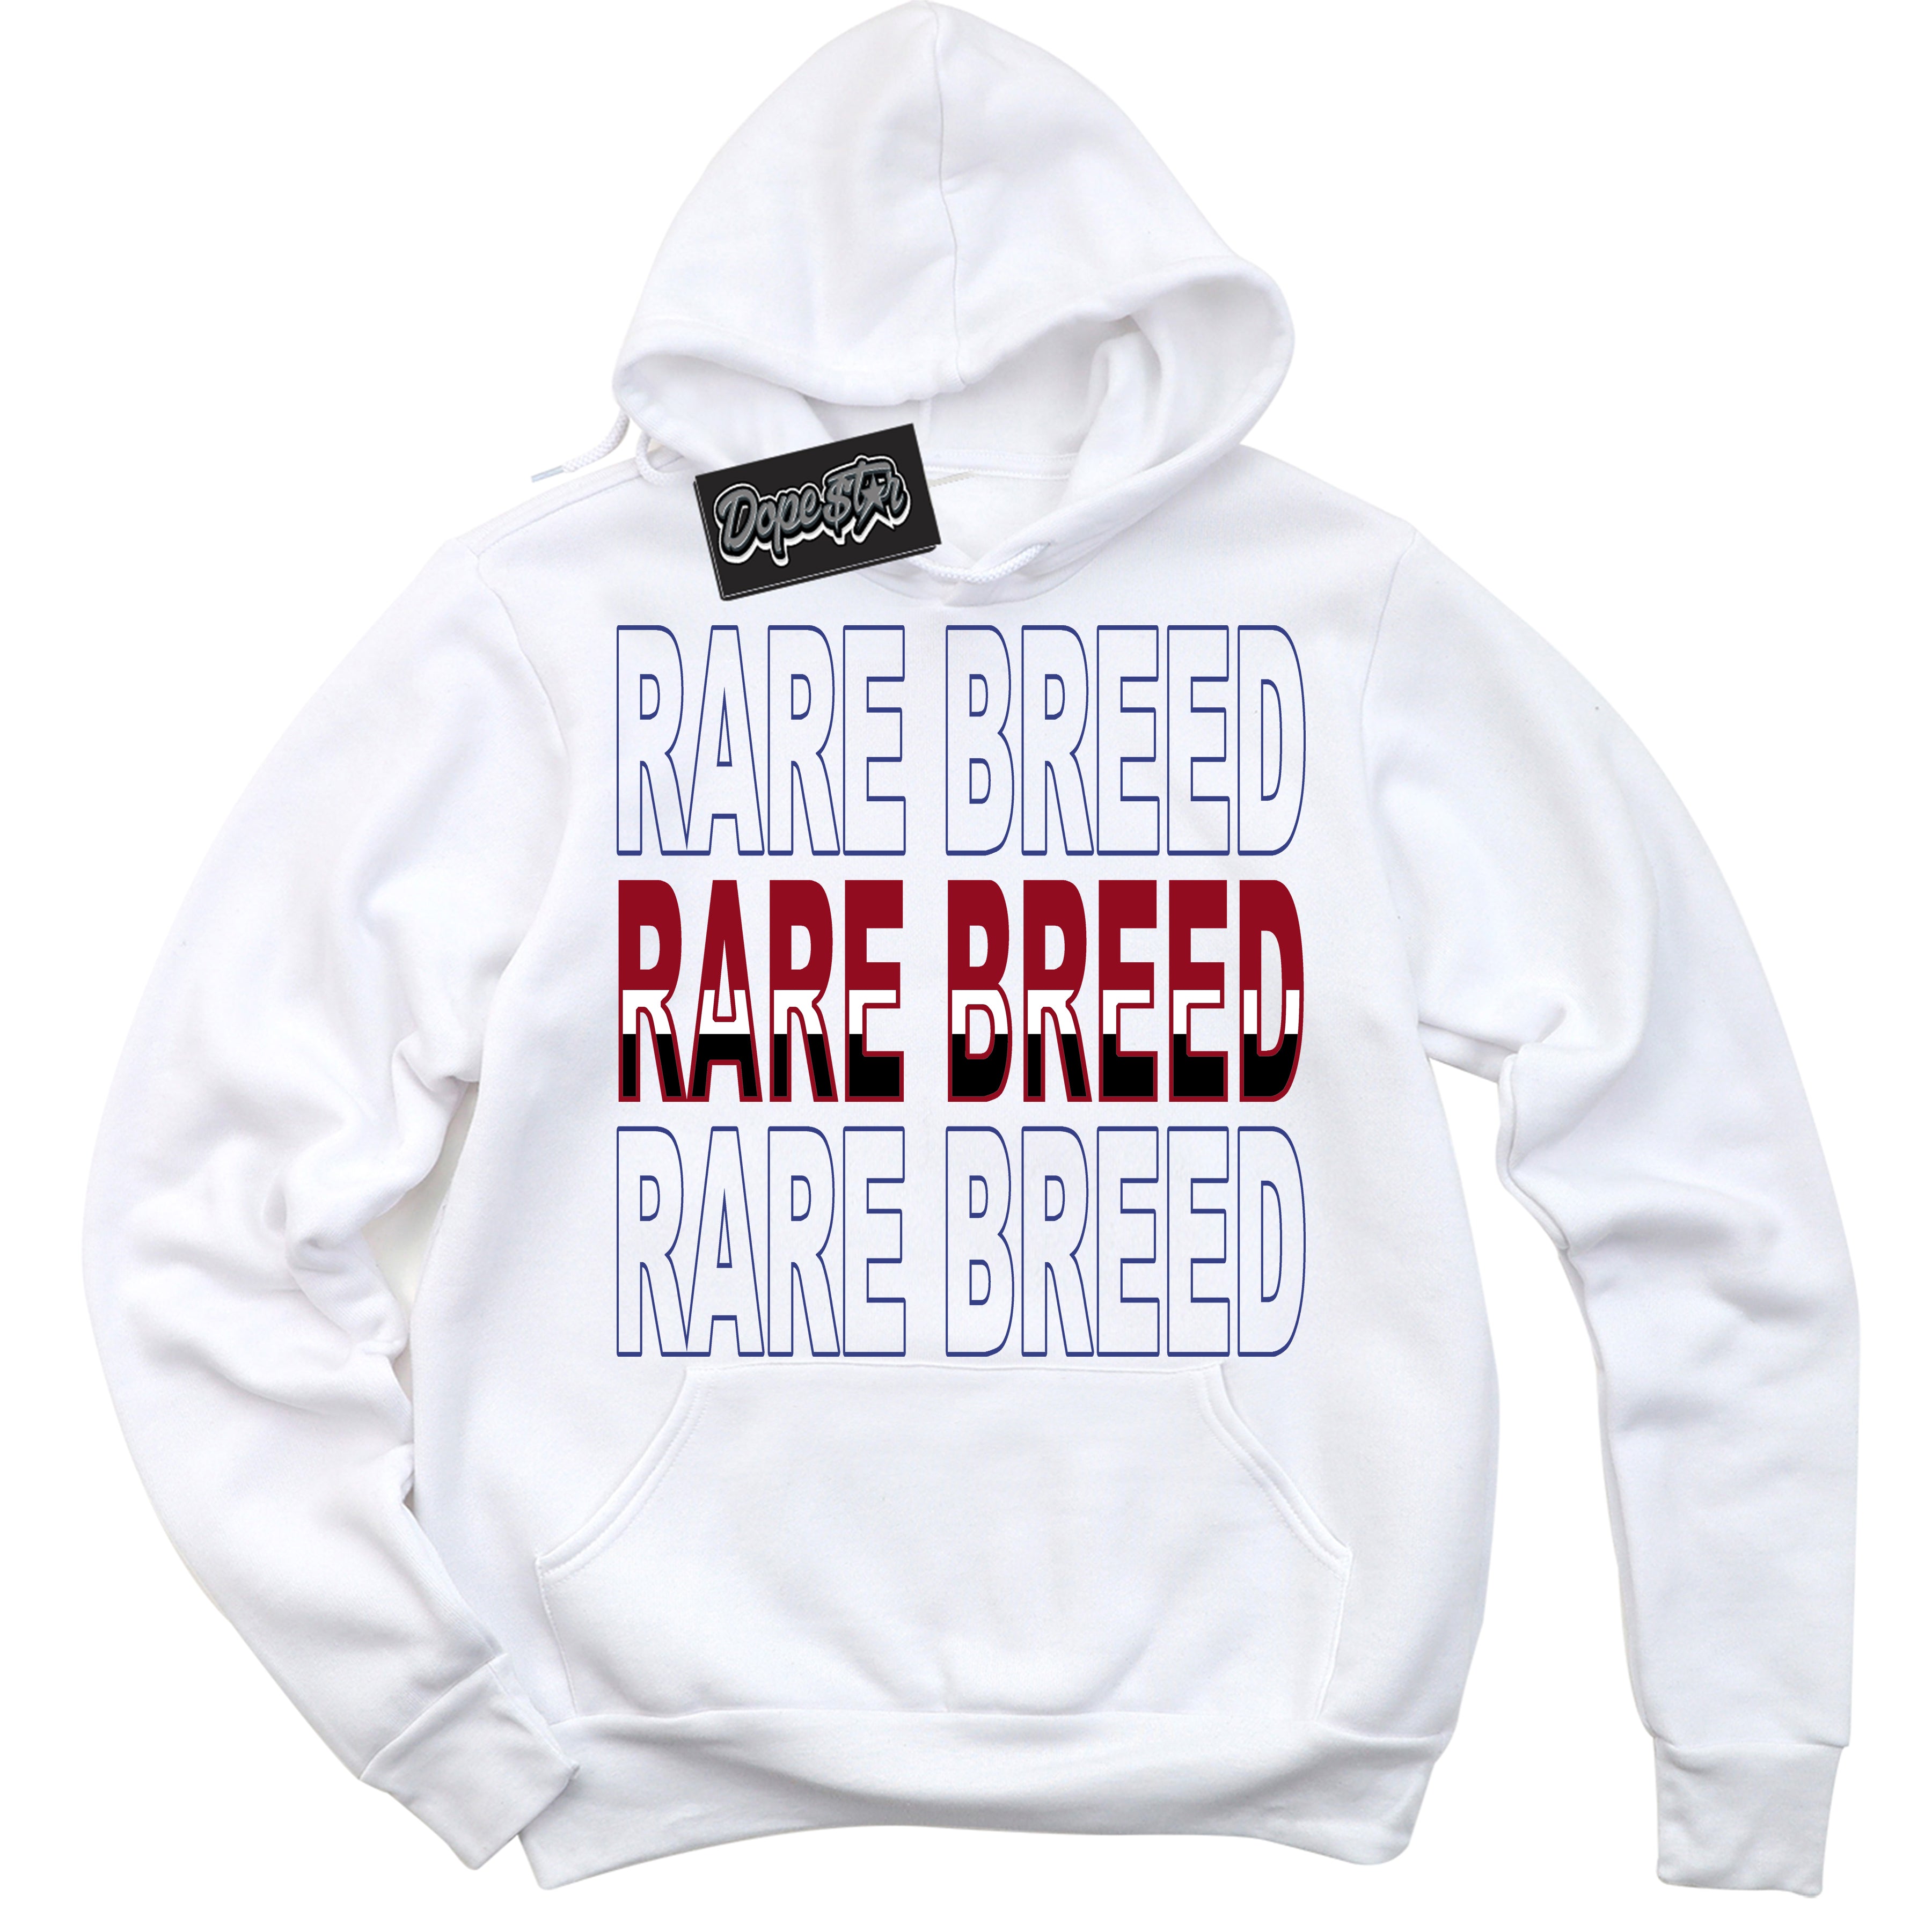 Cool White Hoodie with “ Rare Breed ”  design that Perfectly Matches Playoffs 8s Sneakers.